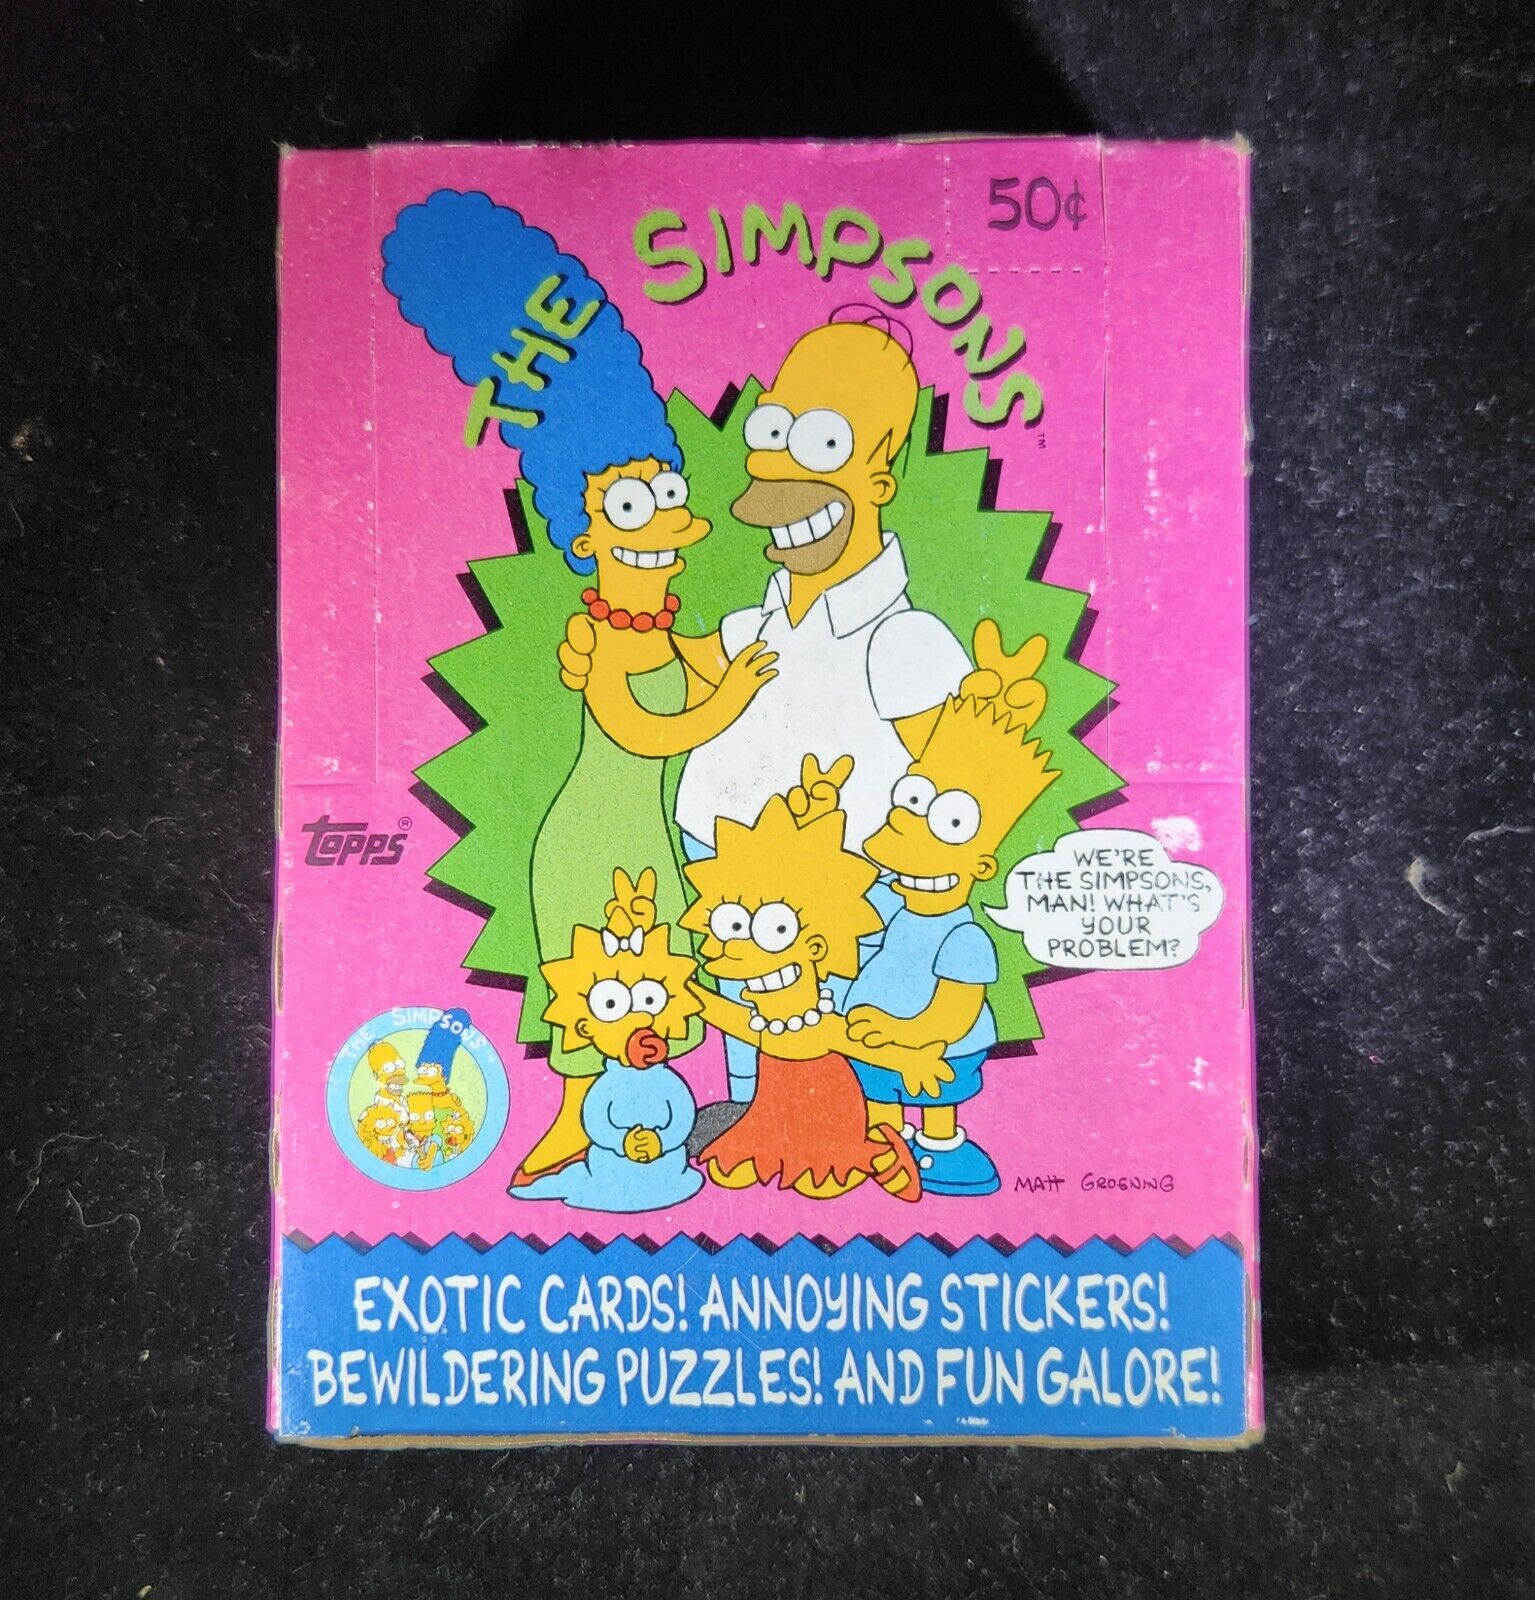 The Simpsons Trading Cards - Full Box of 36 Wax Packs - Topps